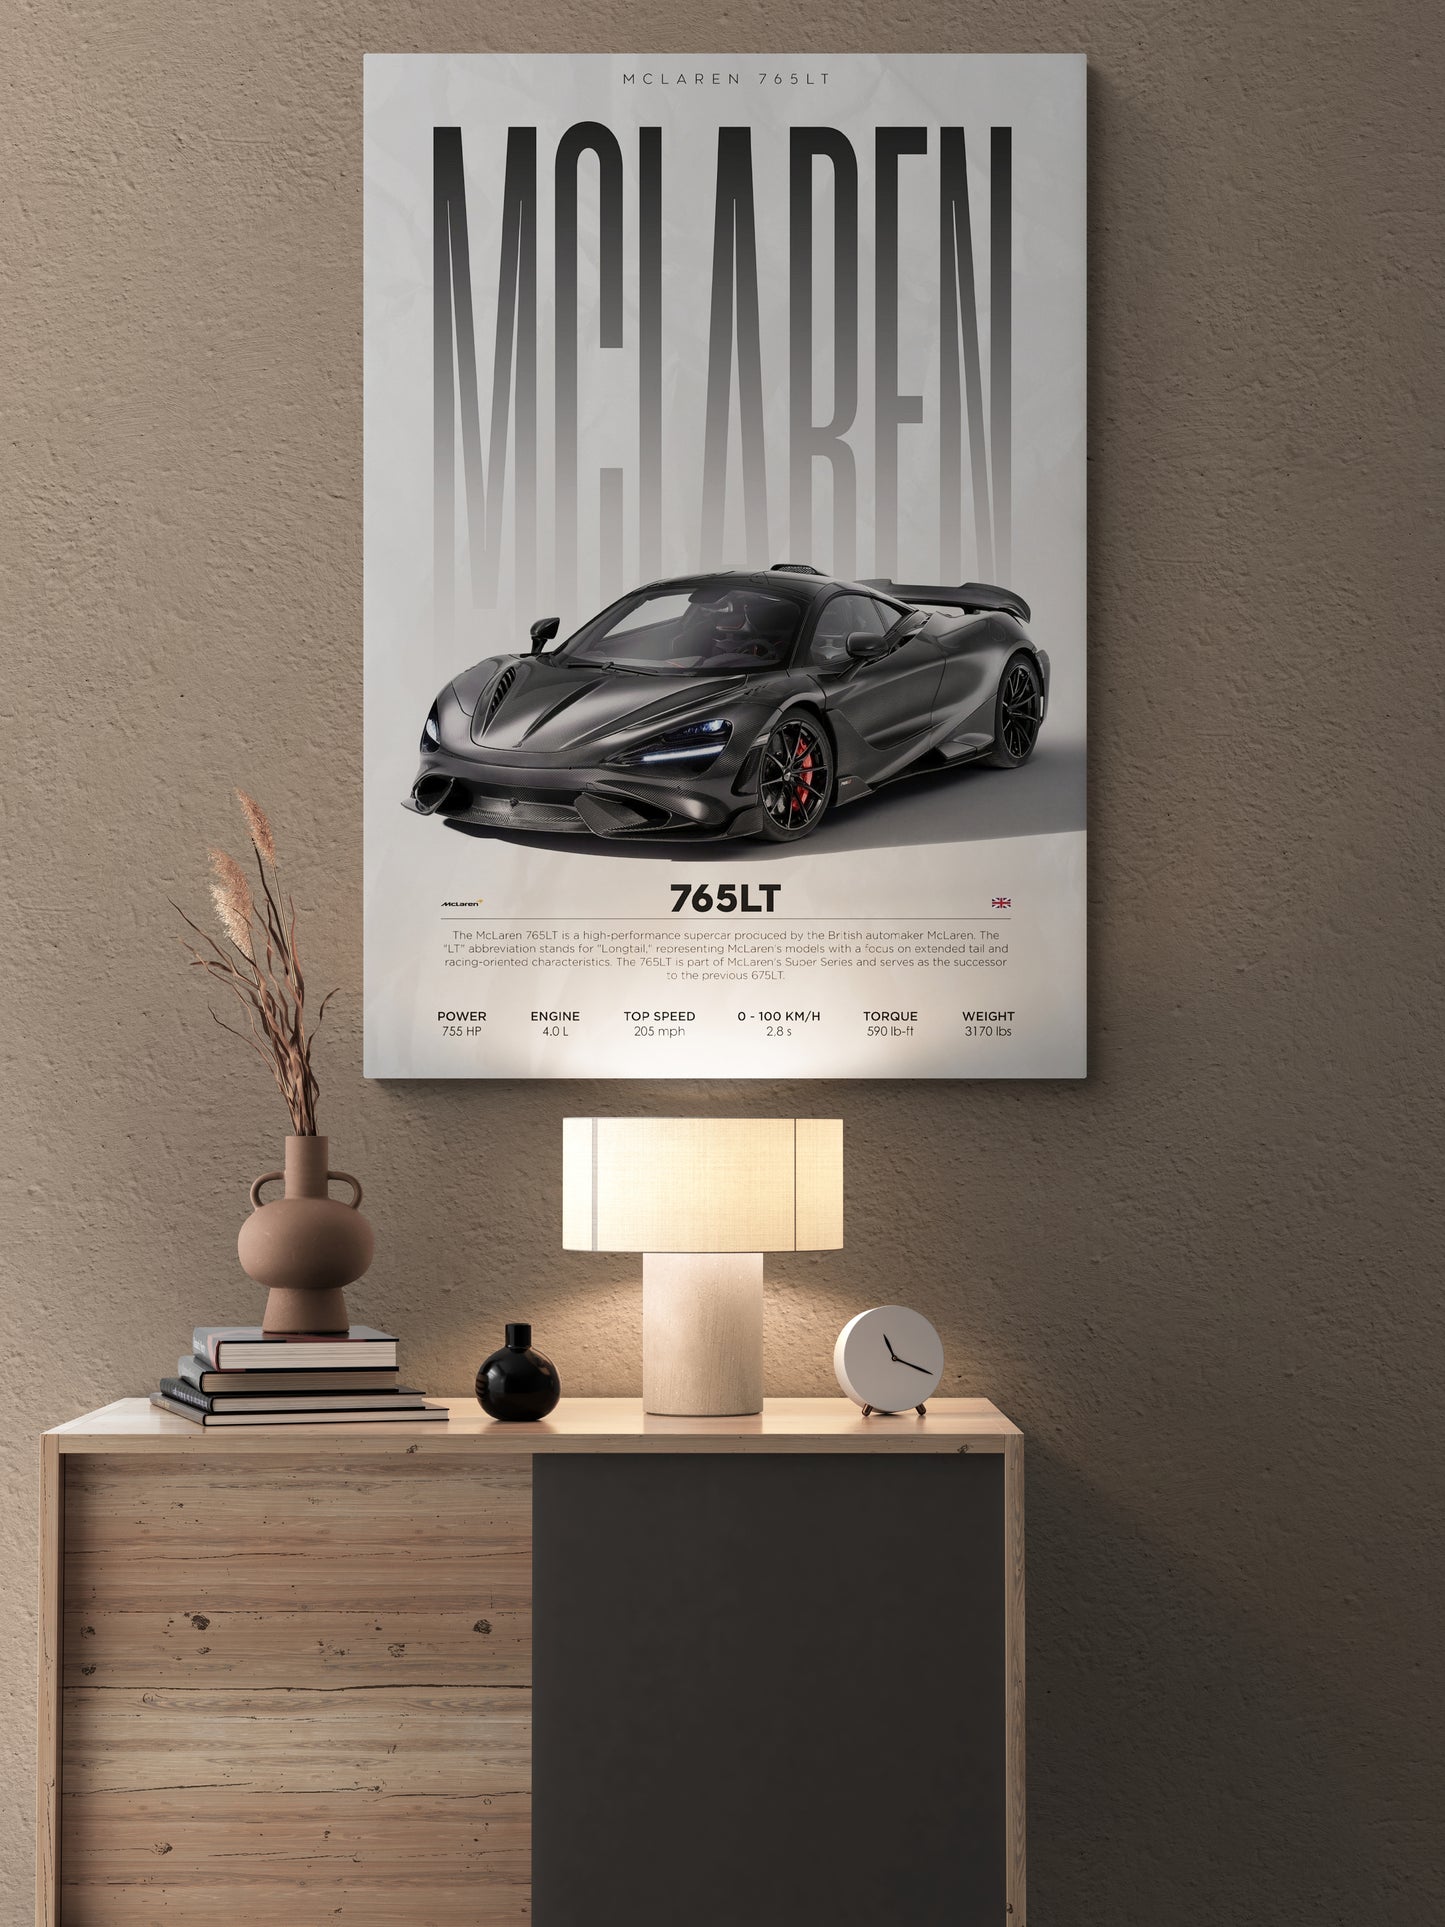 Elevate your home art collection with Essential Walls' best posters and colored prints canvas, featuring the McLaren 765LT. Shop now at our posters shop online for free delivery and easy returns.